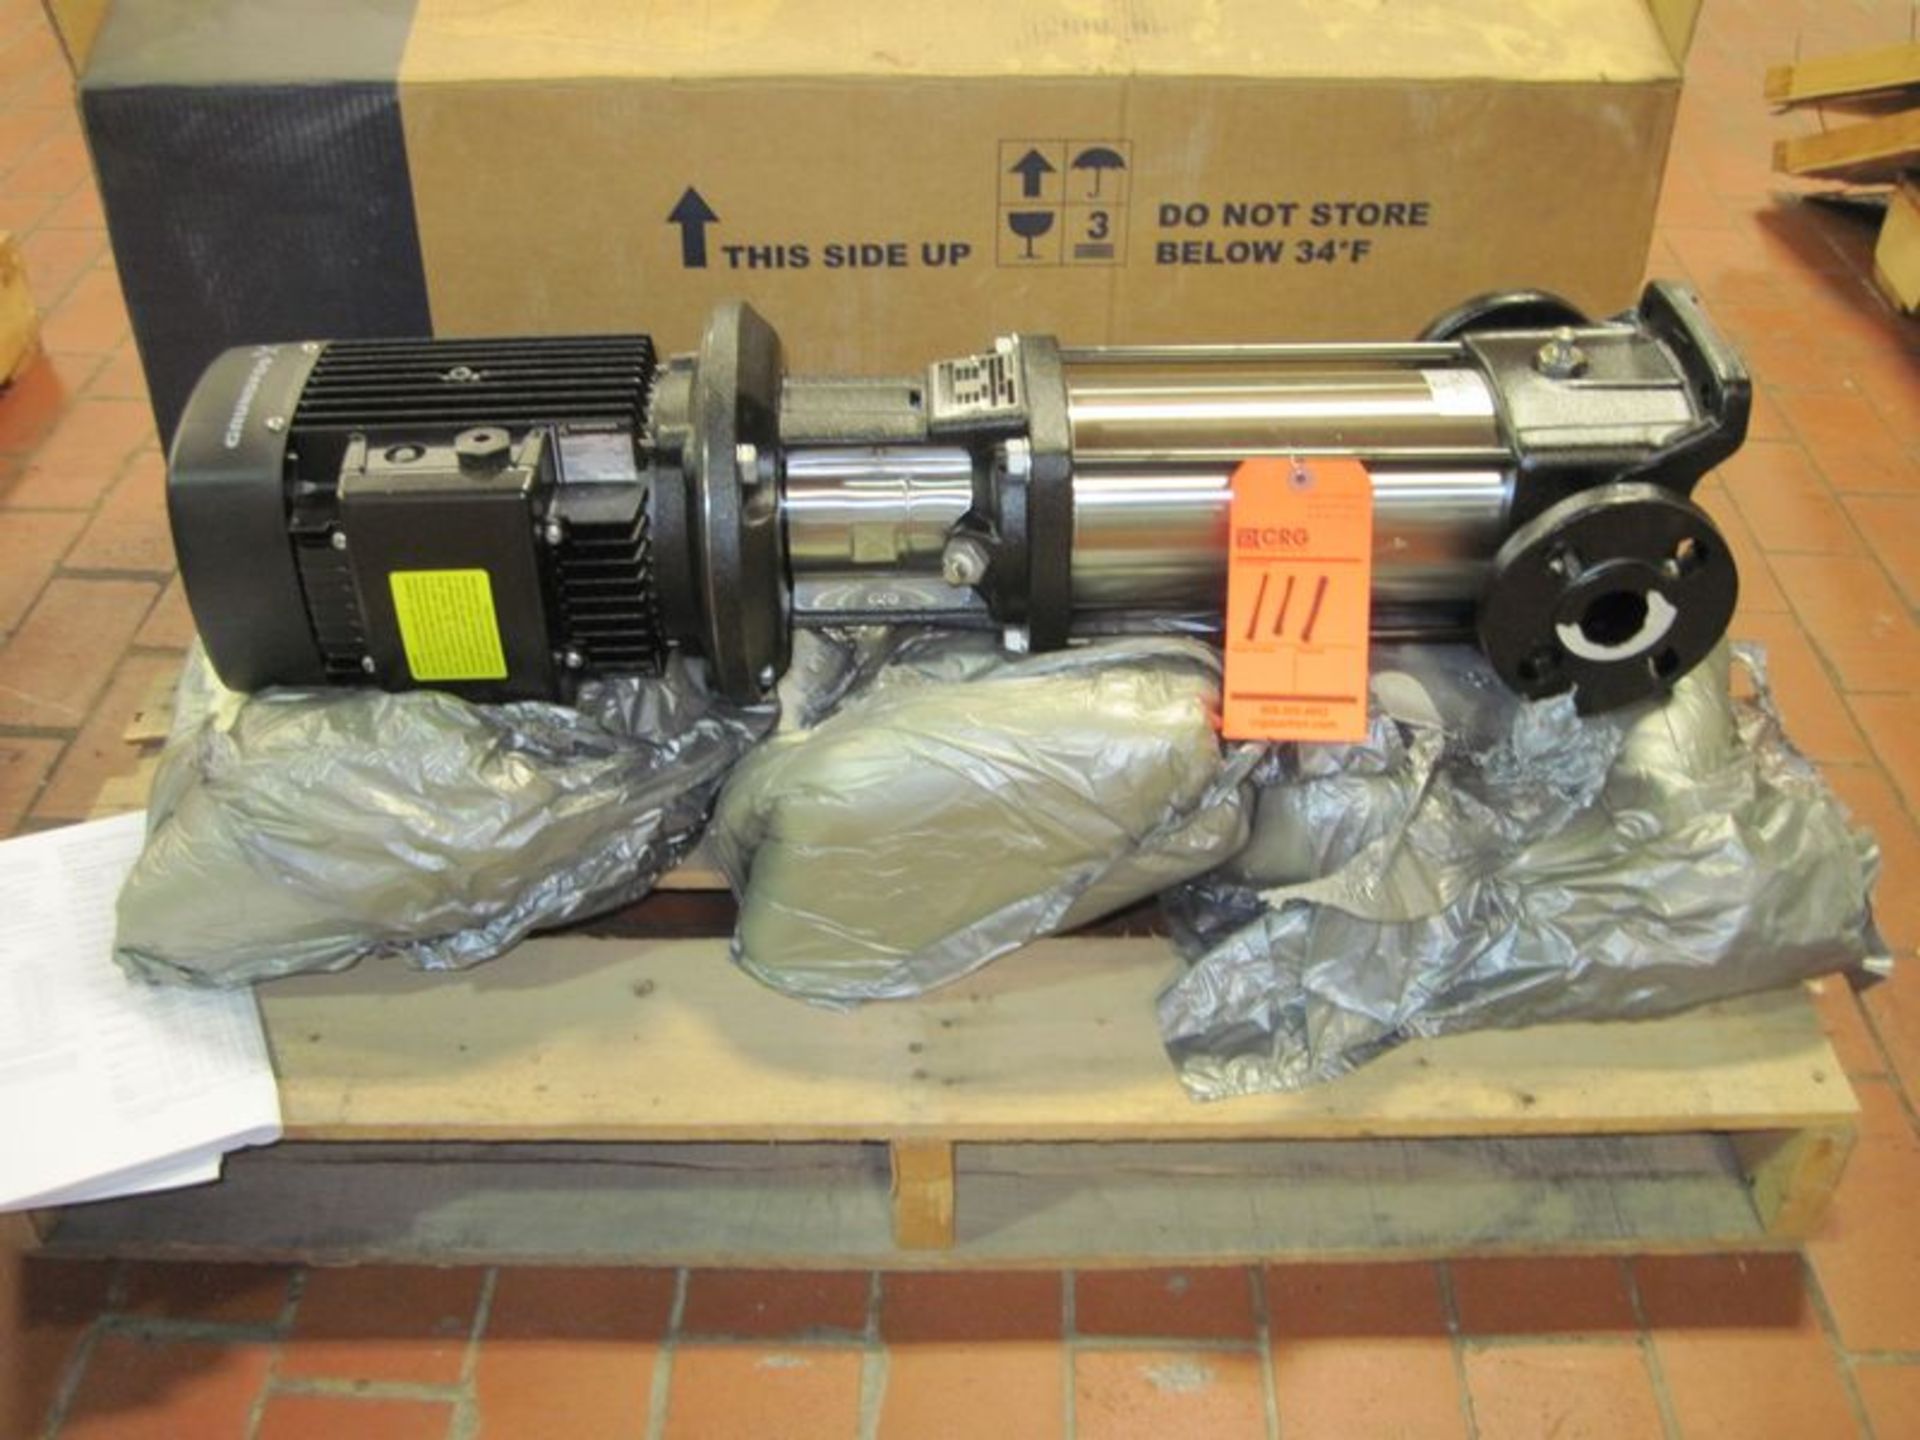 Unused Grundfos steel multistage centrifugal pump. Model CR3, serial# A96083224-p21043109. With